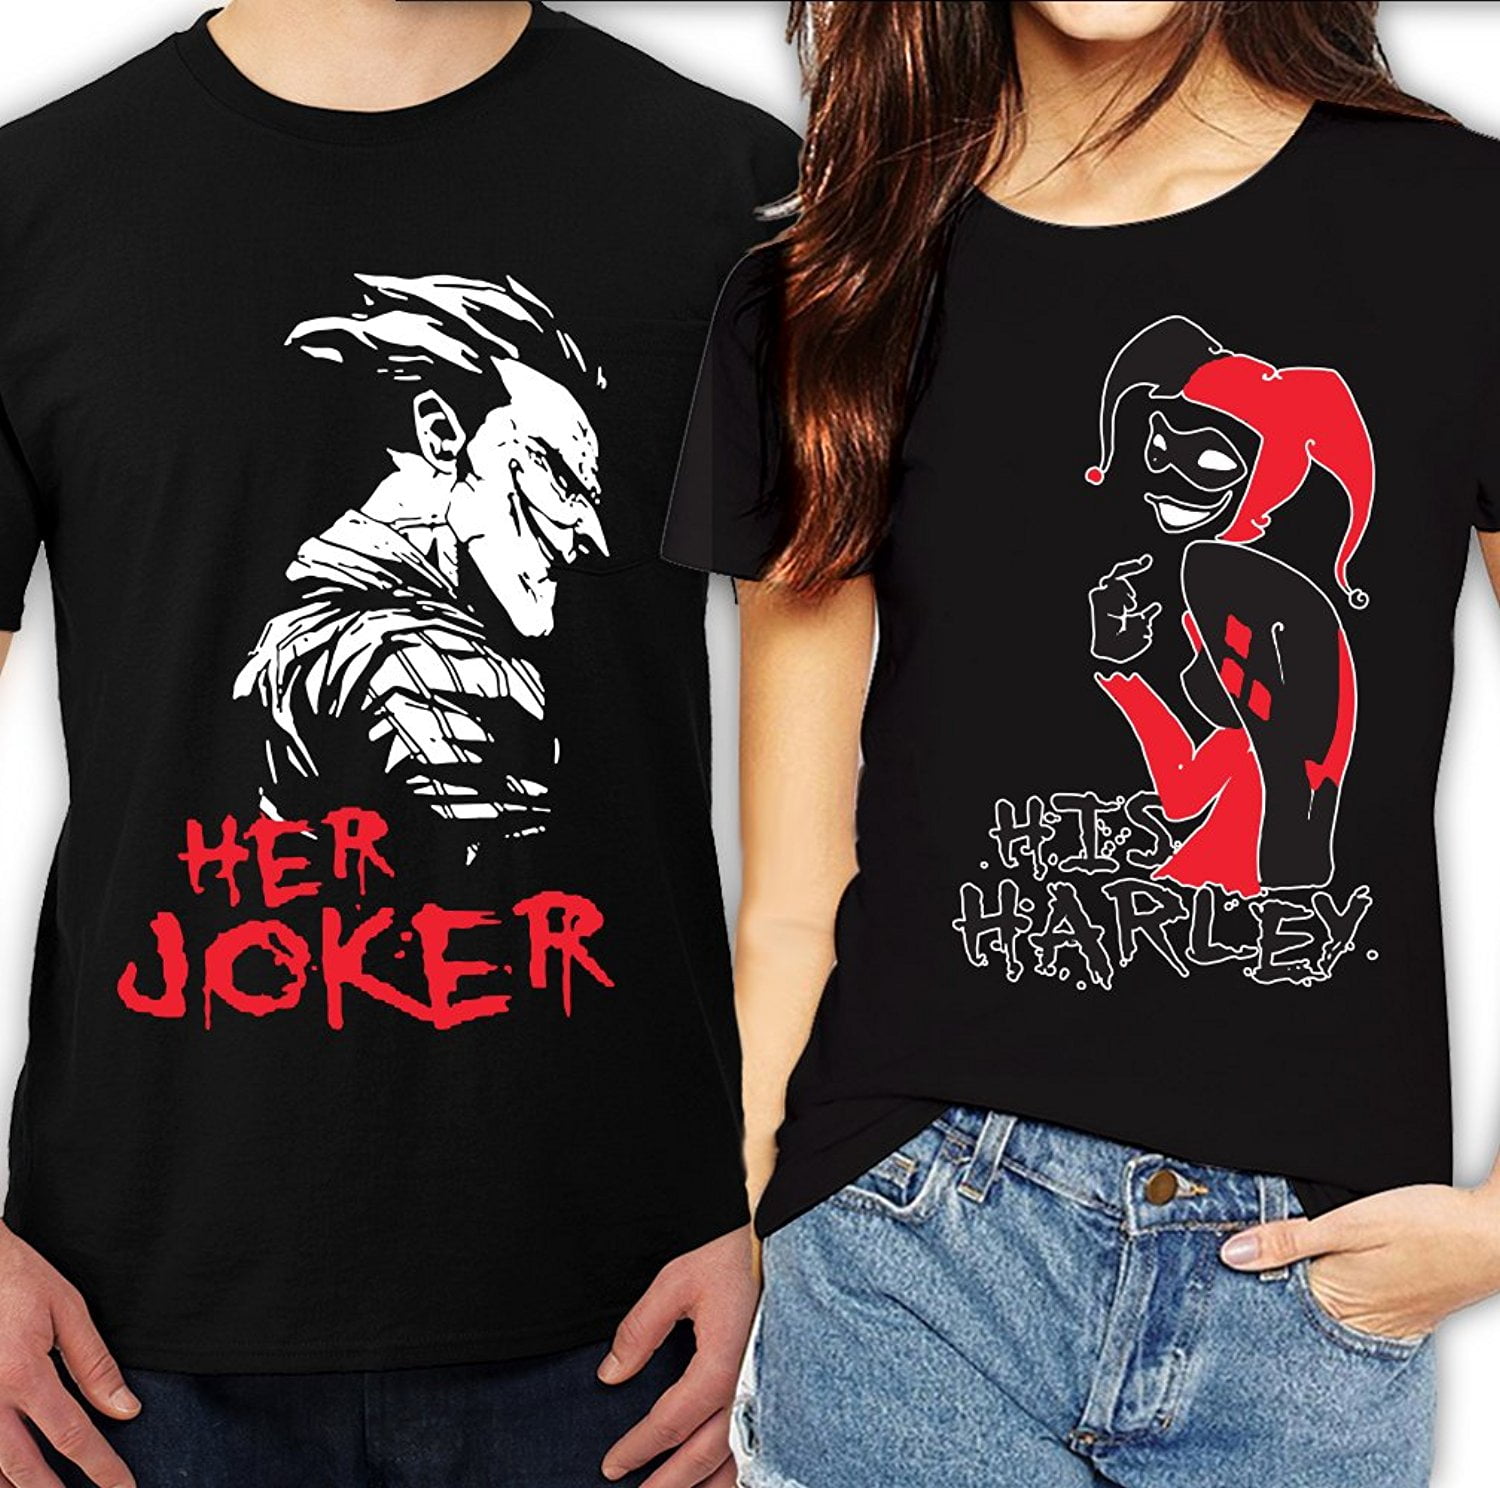 Her Joker His Harley Matching Unisex Couple Hoodies Matching Couple Outfits 